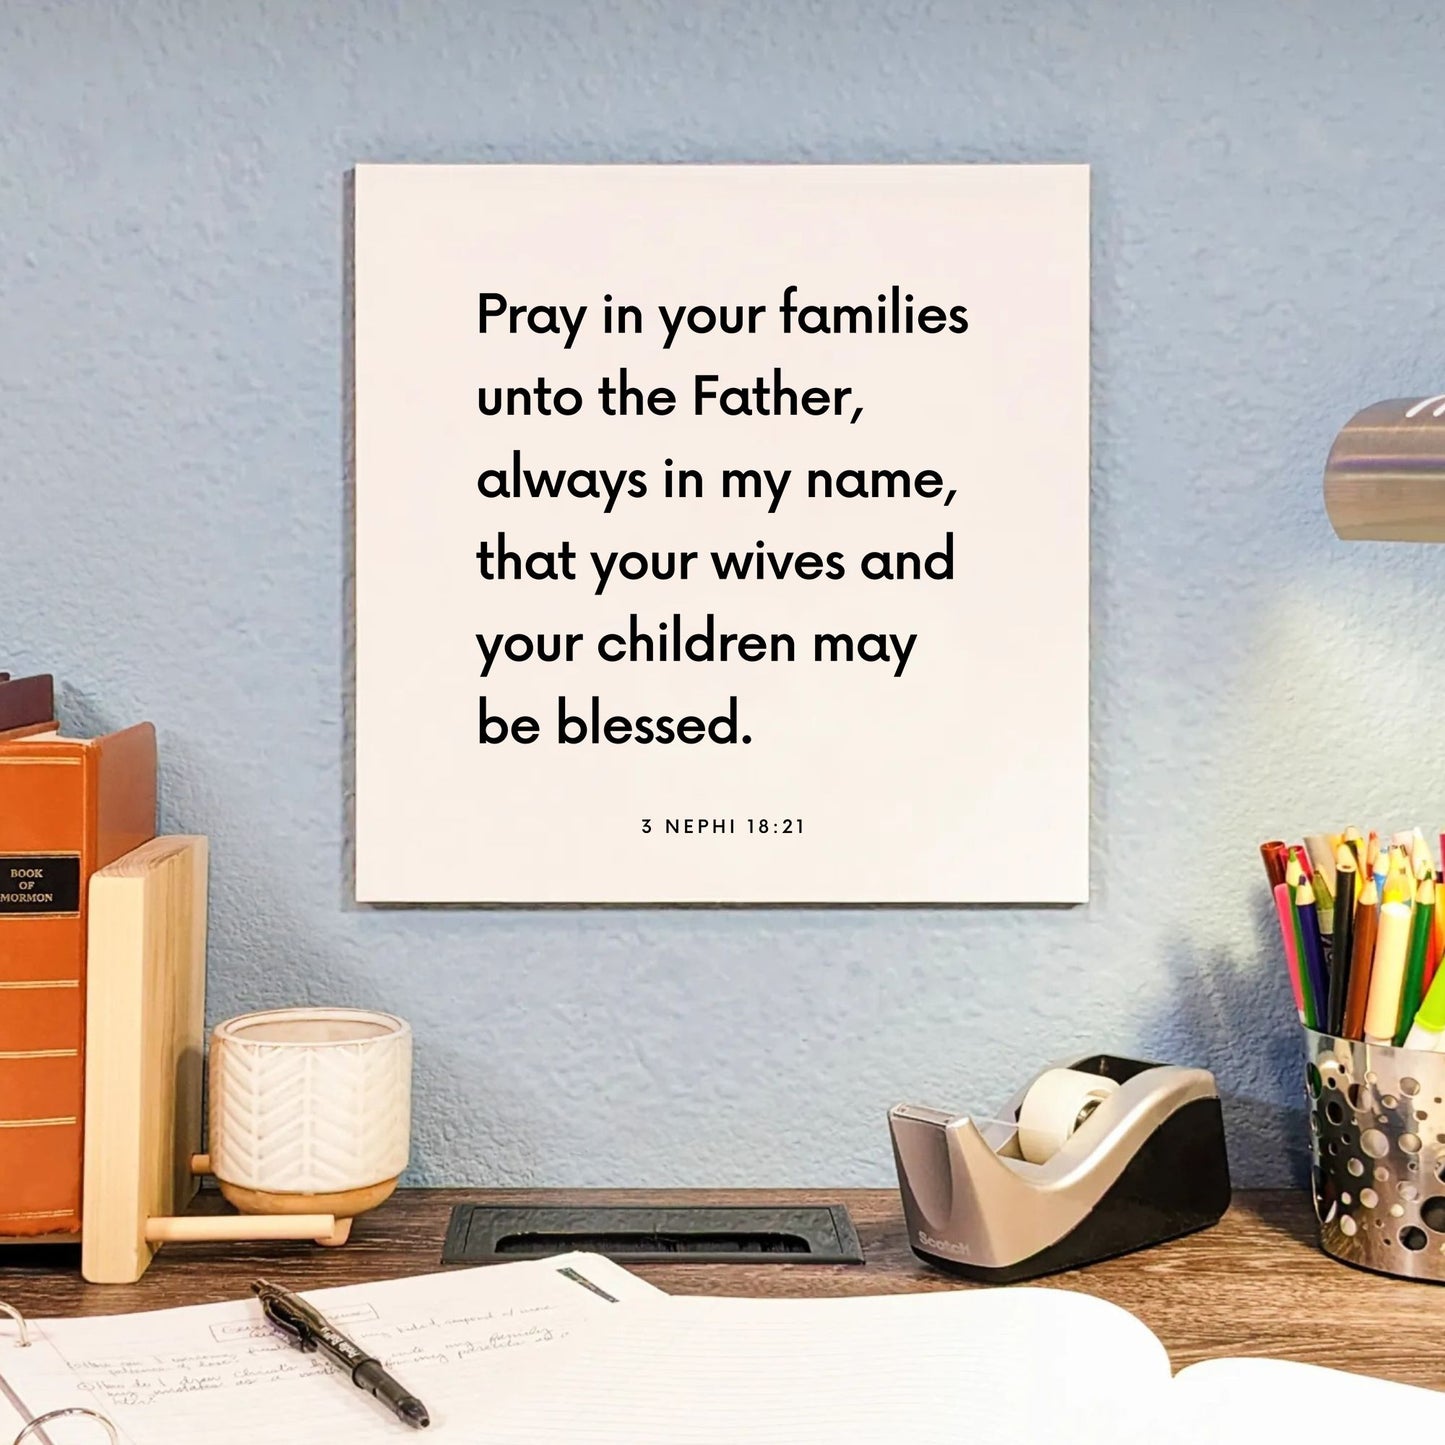 Desk mouting of the scripture tile for 3 Nephi 18:21 - "Pray in your families unto the Father"